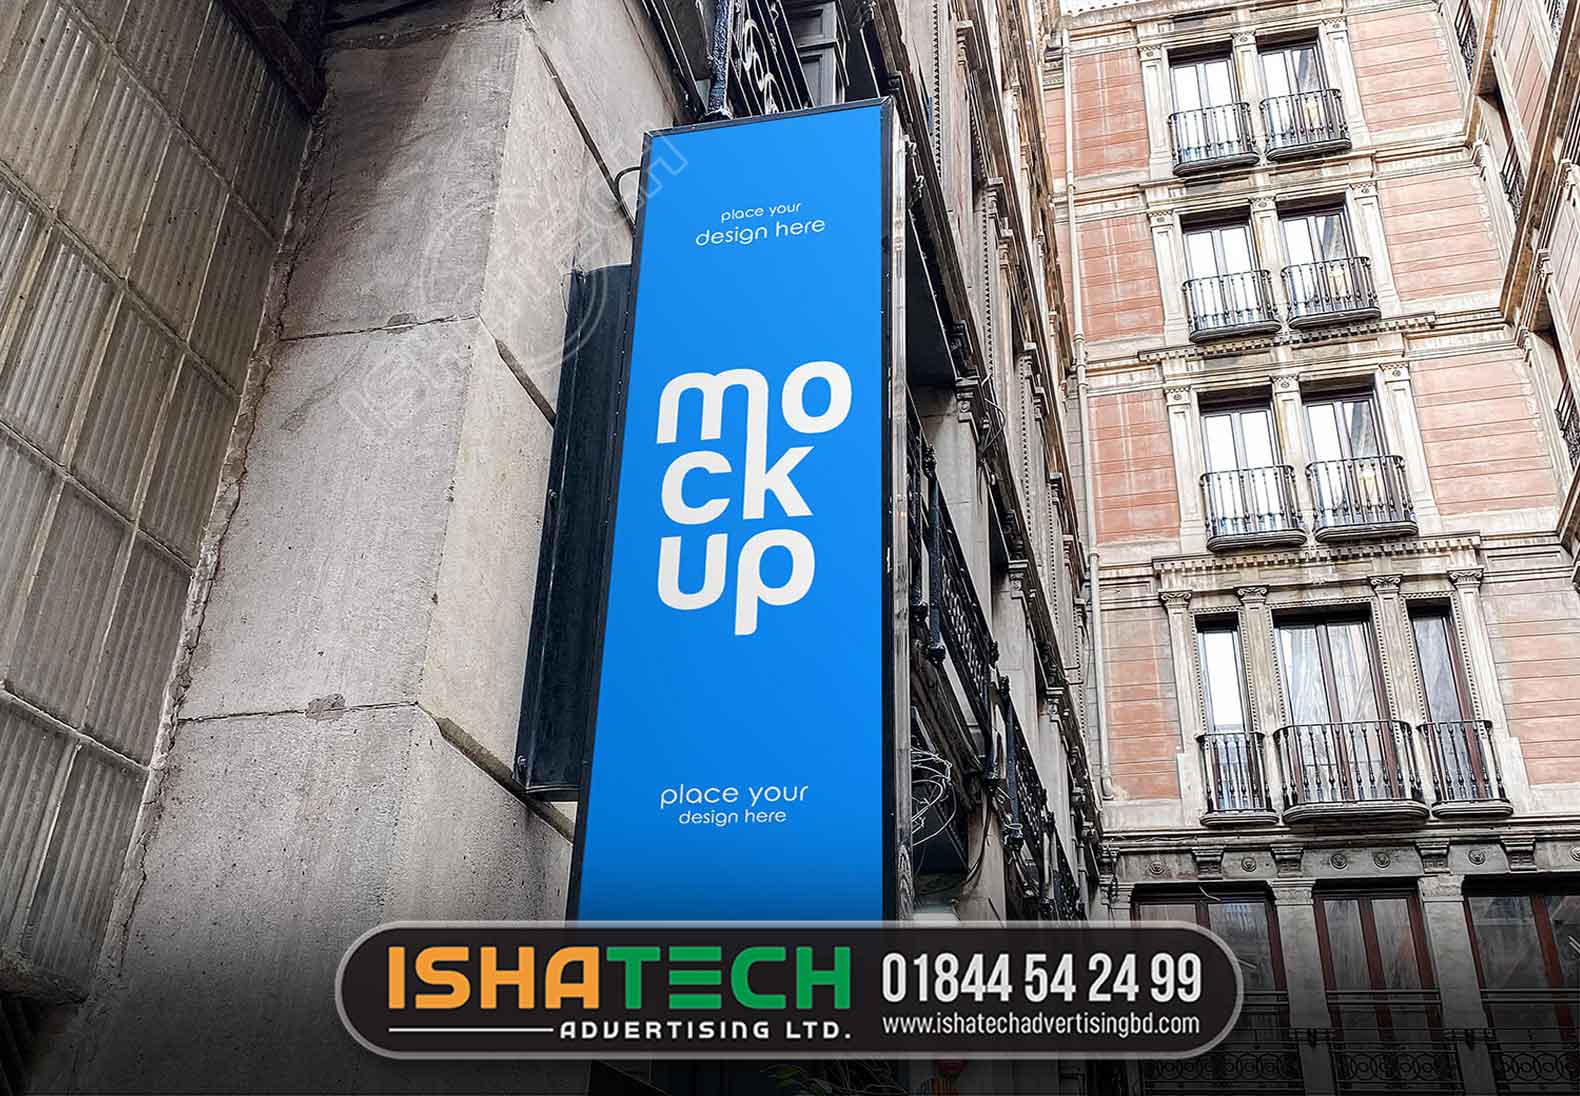 VERTICAL LED SIGNS MAKING BY ISHATECH ADVERTIDING LTD, BEST SIGNBOARD MAKER AND MANUFACTURER AGENCY IN DHAKA, BANGLADESH